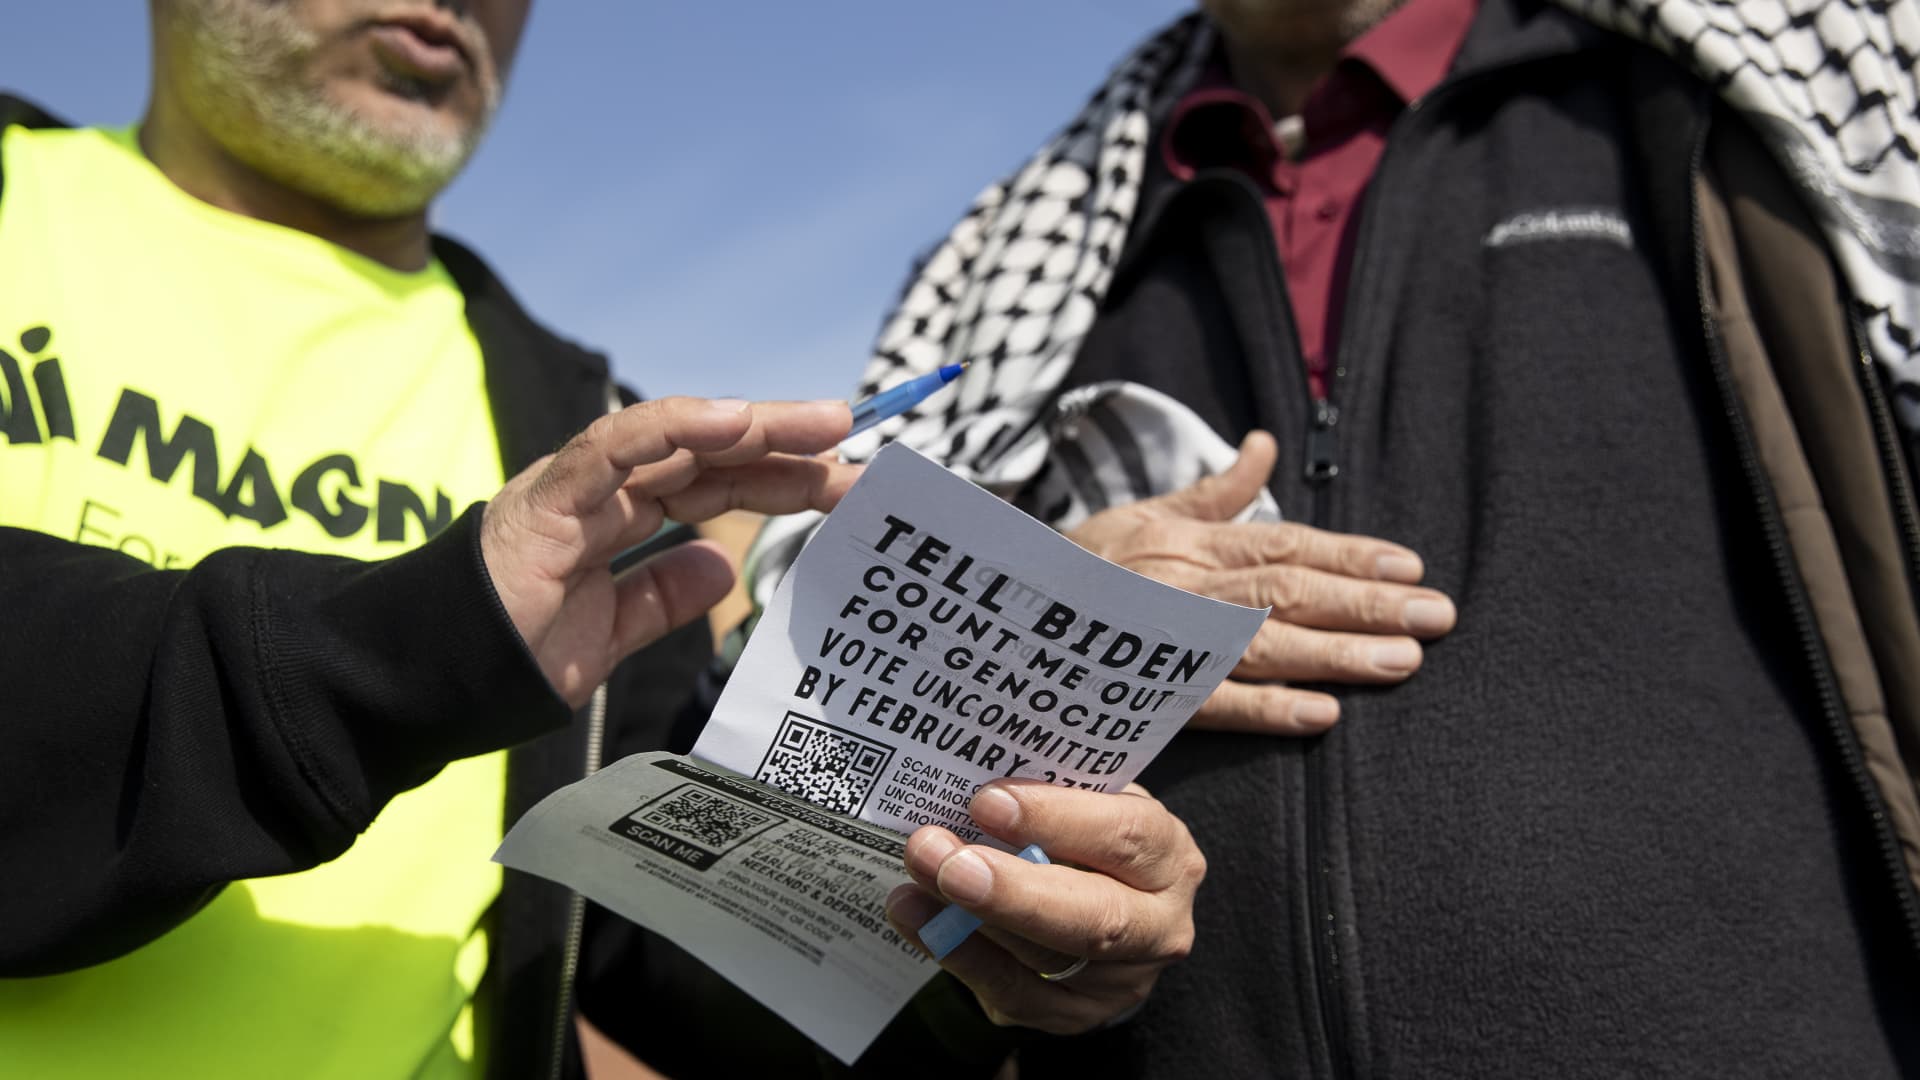 A man explains the importance of voting 'uncommited' as he hands out fliers outside the Islamic Center of Detroit to ask voters to vote 'uncommitted' in Michigan Primary elections on Tuesday, in Michigan, United States on February 26, 2024. 